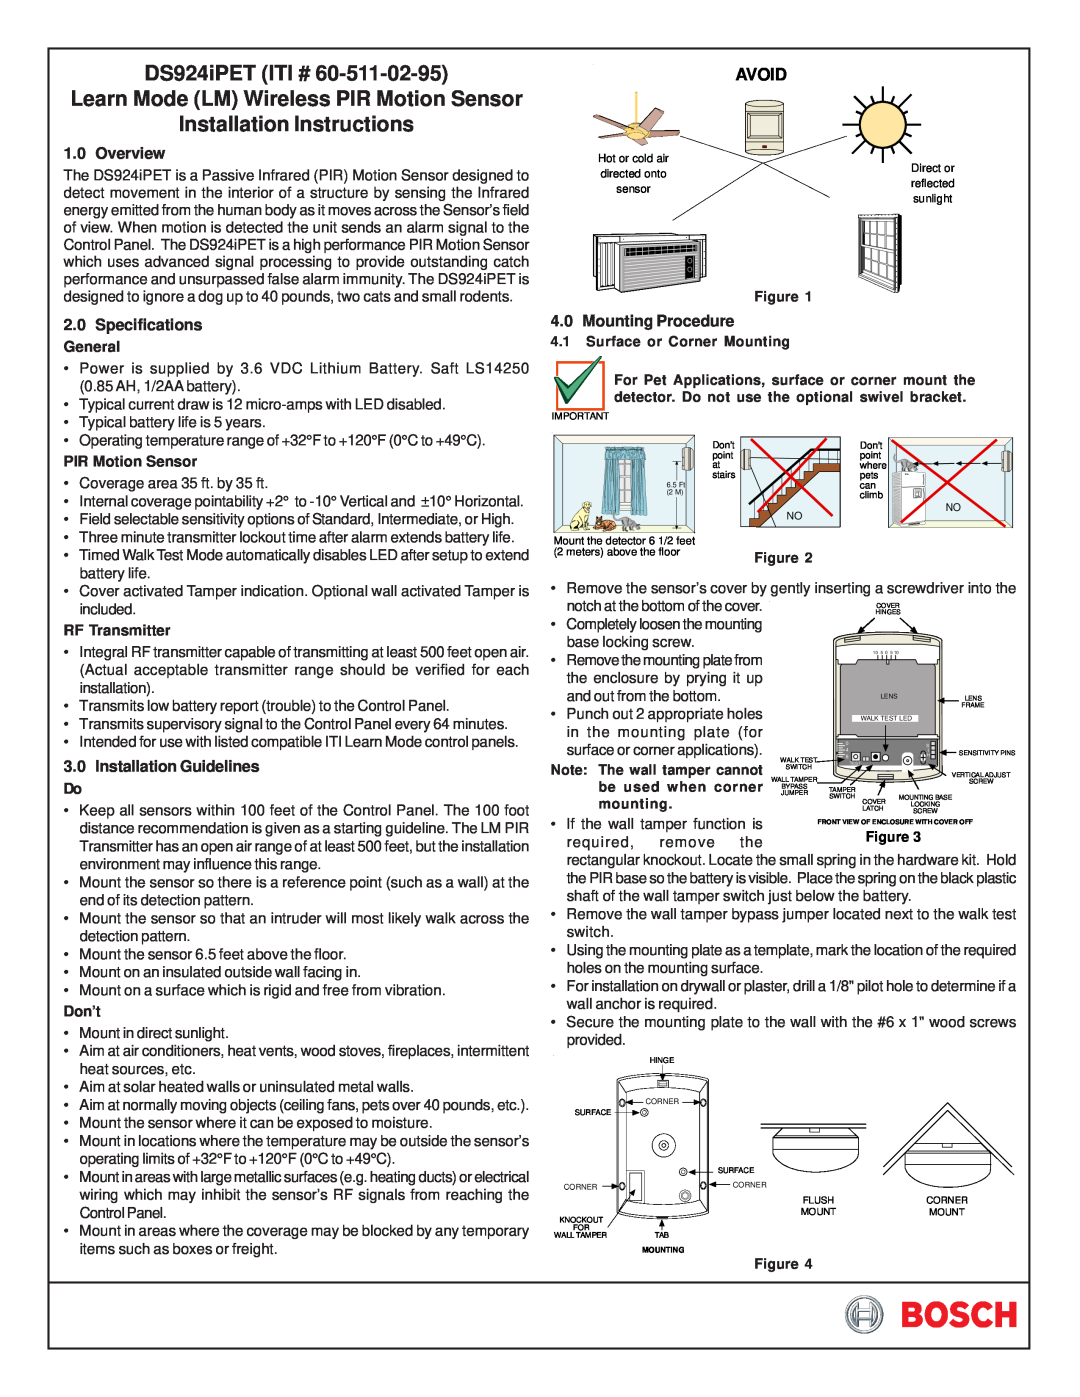 Bosch Appliances DS924IPET specifications Overview, 2.0Specifications General, 4.0Mounting Procedure, DS924iPET ITI # 